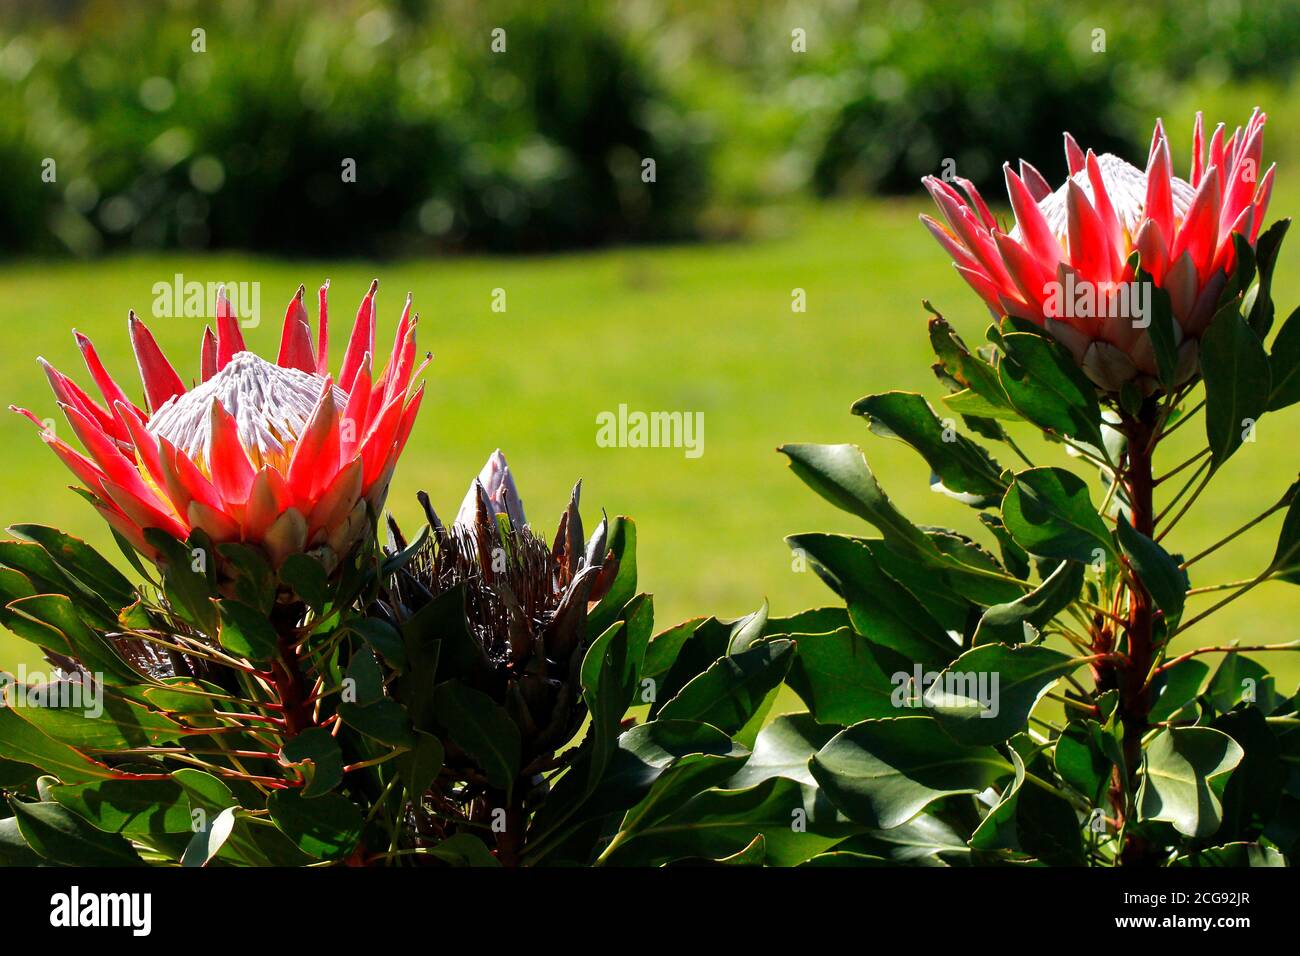 A king protea flower photographed in Kirstenbosch National Botanical Garden in Cape Town. Stock Photo